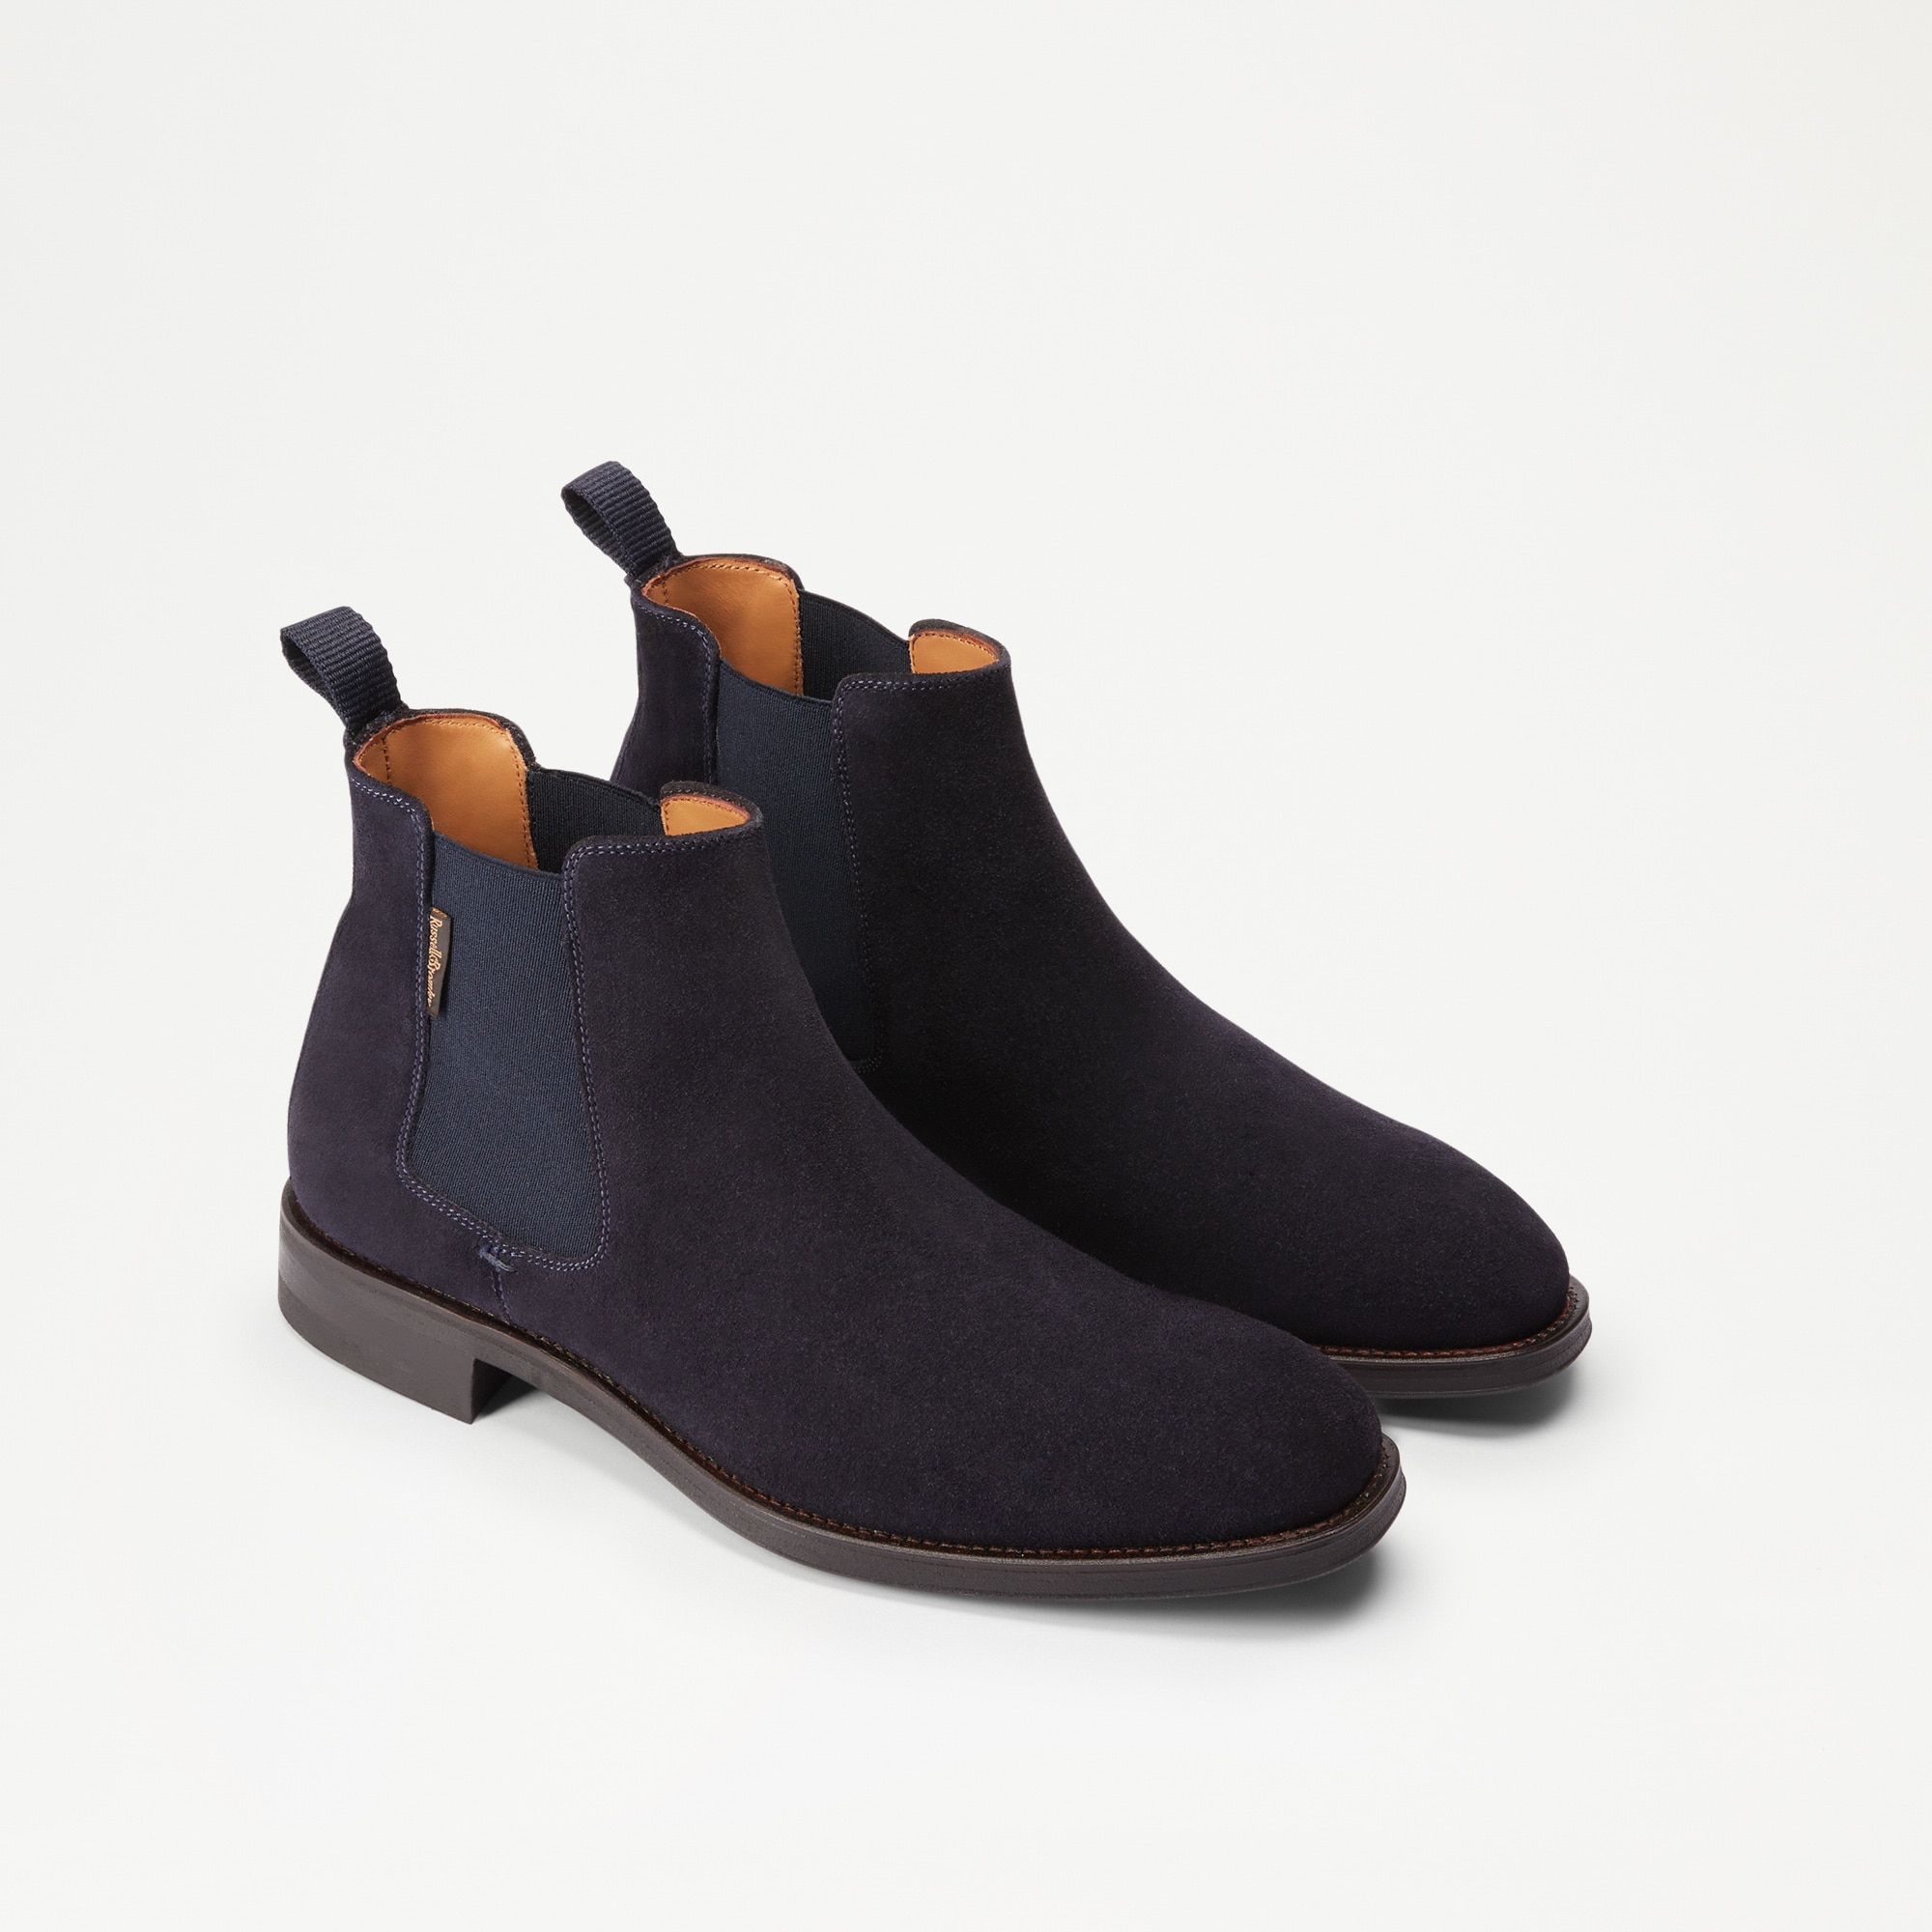 BURLINGTON Chelsea Boot in Blue Suede | Russell & Bromley